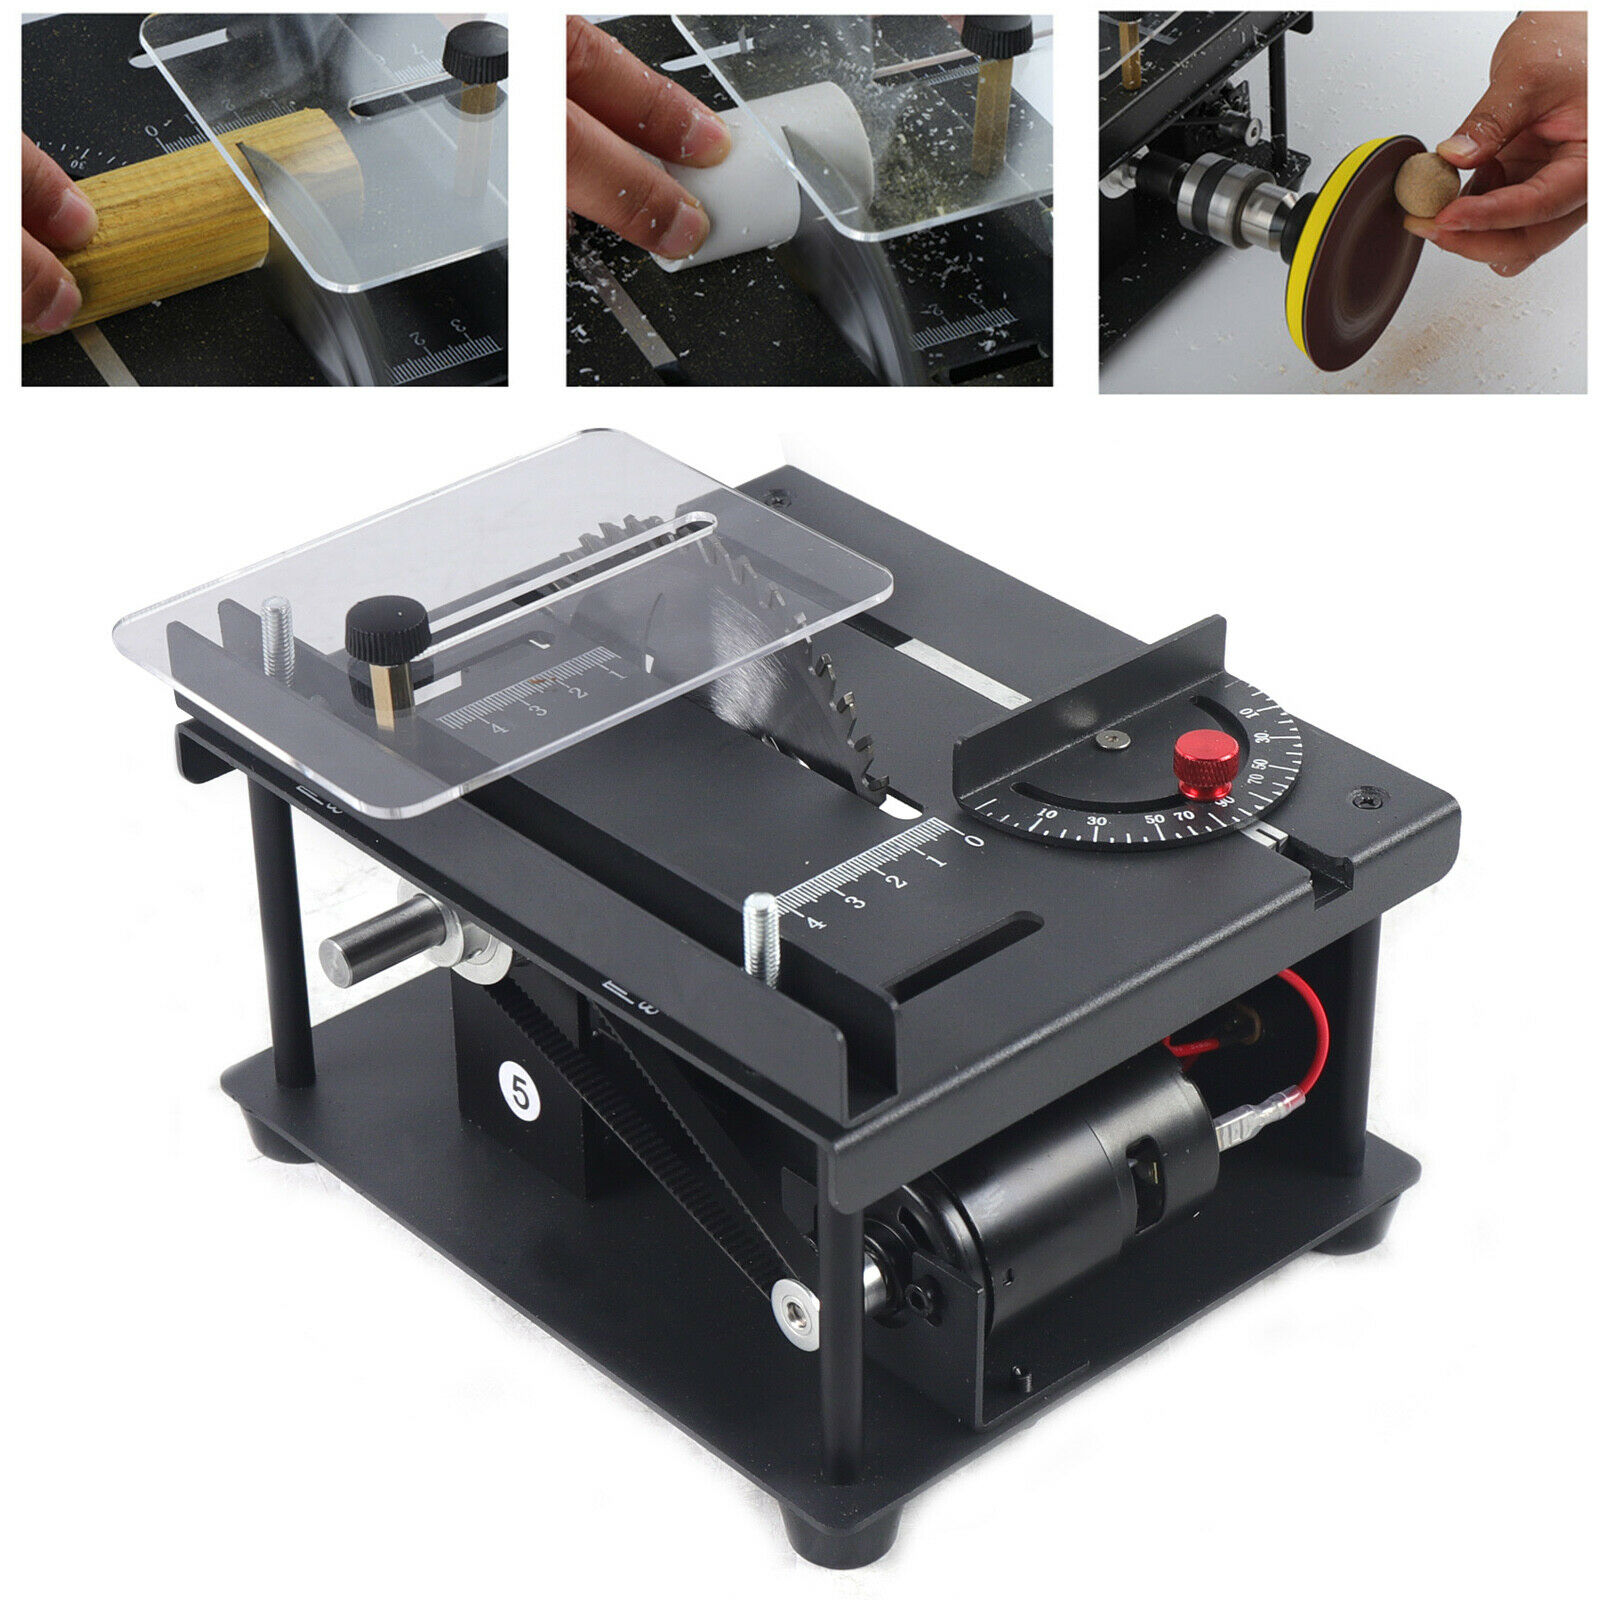 CNCEST Mini Electric Table Saw Hobby DIY Craft Woodworking Sliding Table Saw 